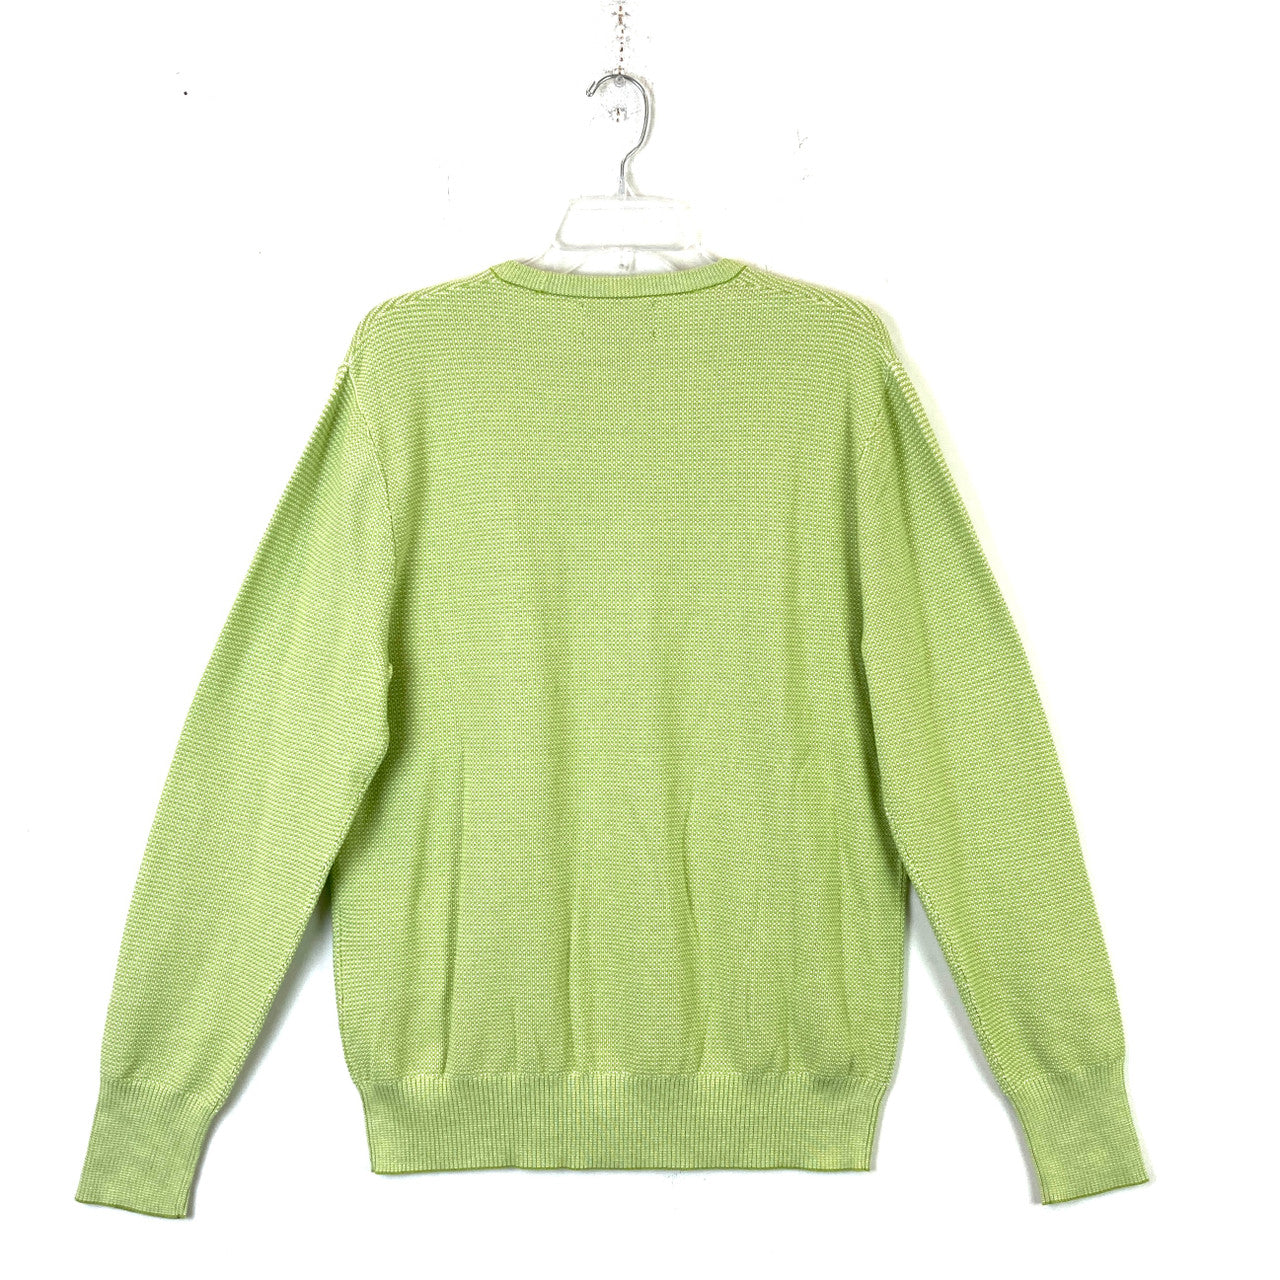 Bonobos Lime and White Patterned Sweater-Back